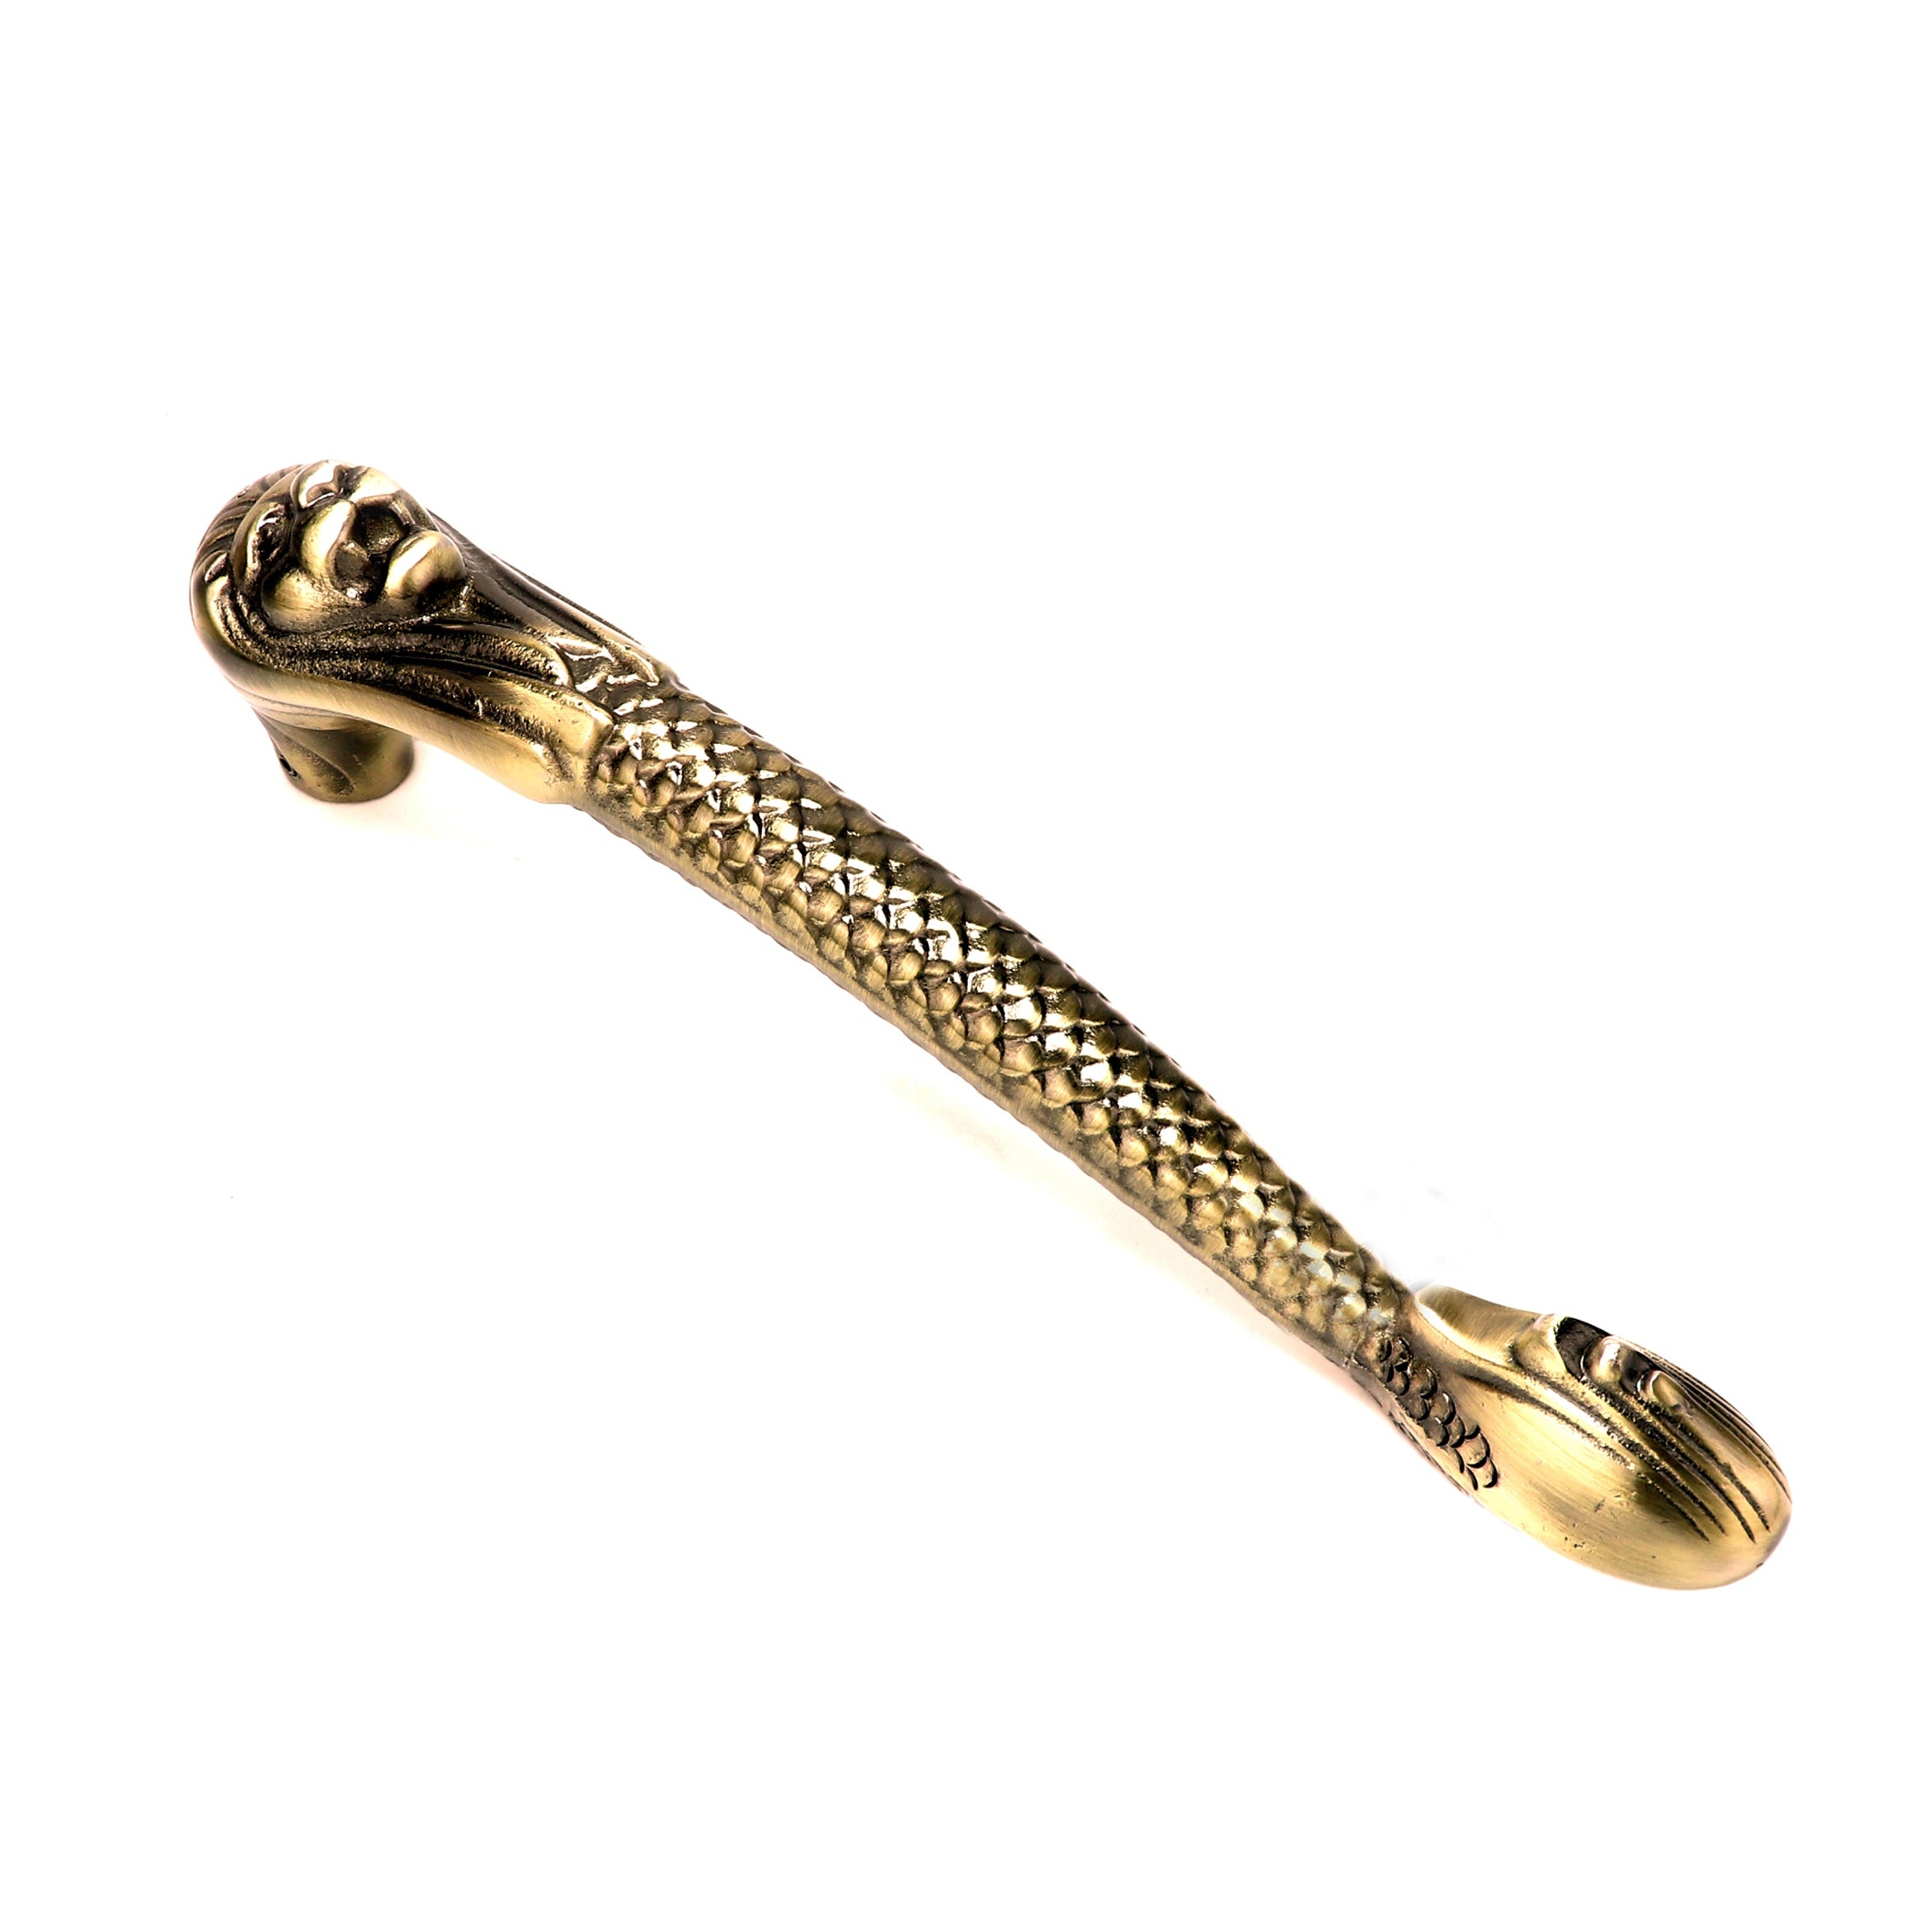 Lion Shape Curved Main Door Handle, Decorative Pull Handle for Glass and Wooden Doors